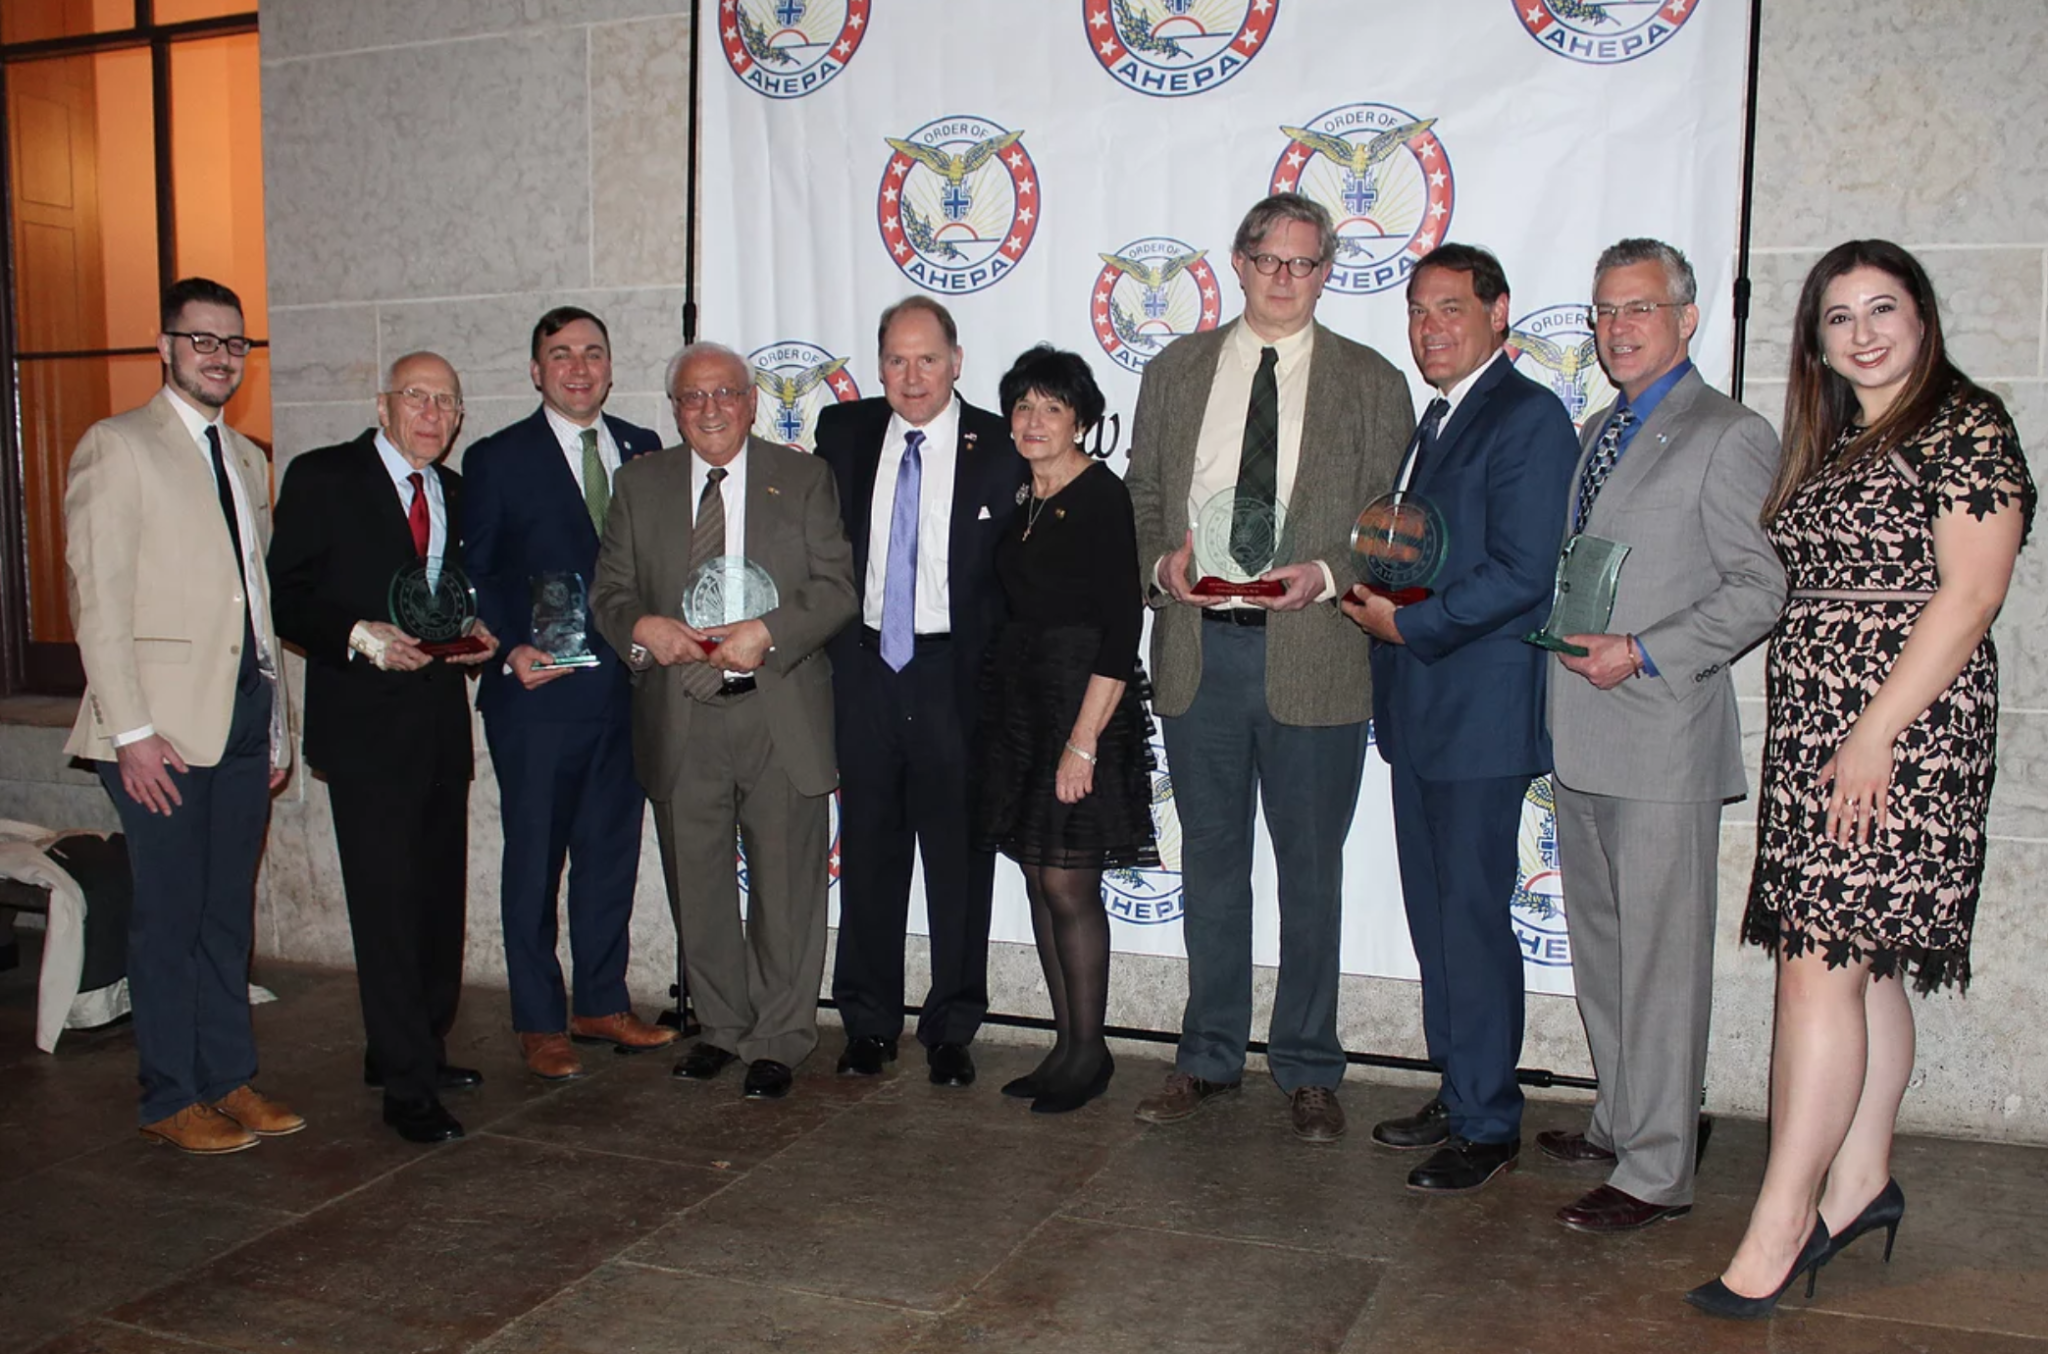 AHEPA Midwestern Regional Banquet Honors Excellence in Ohio